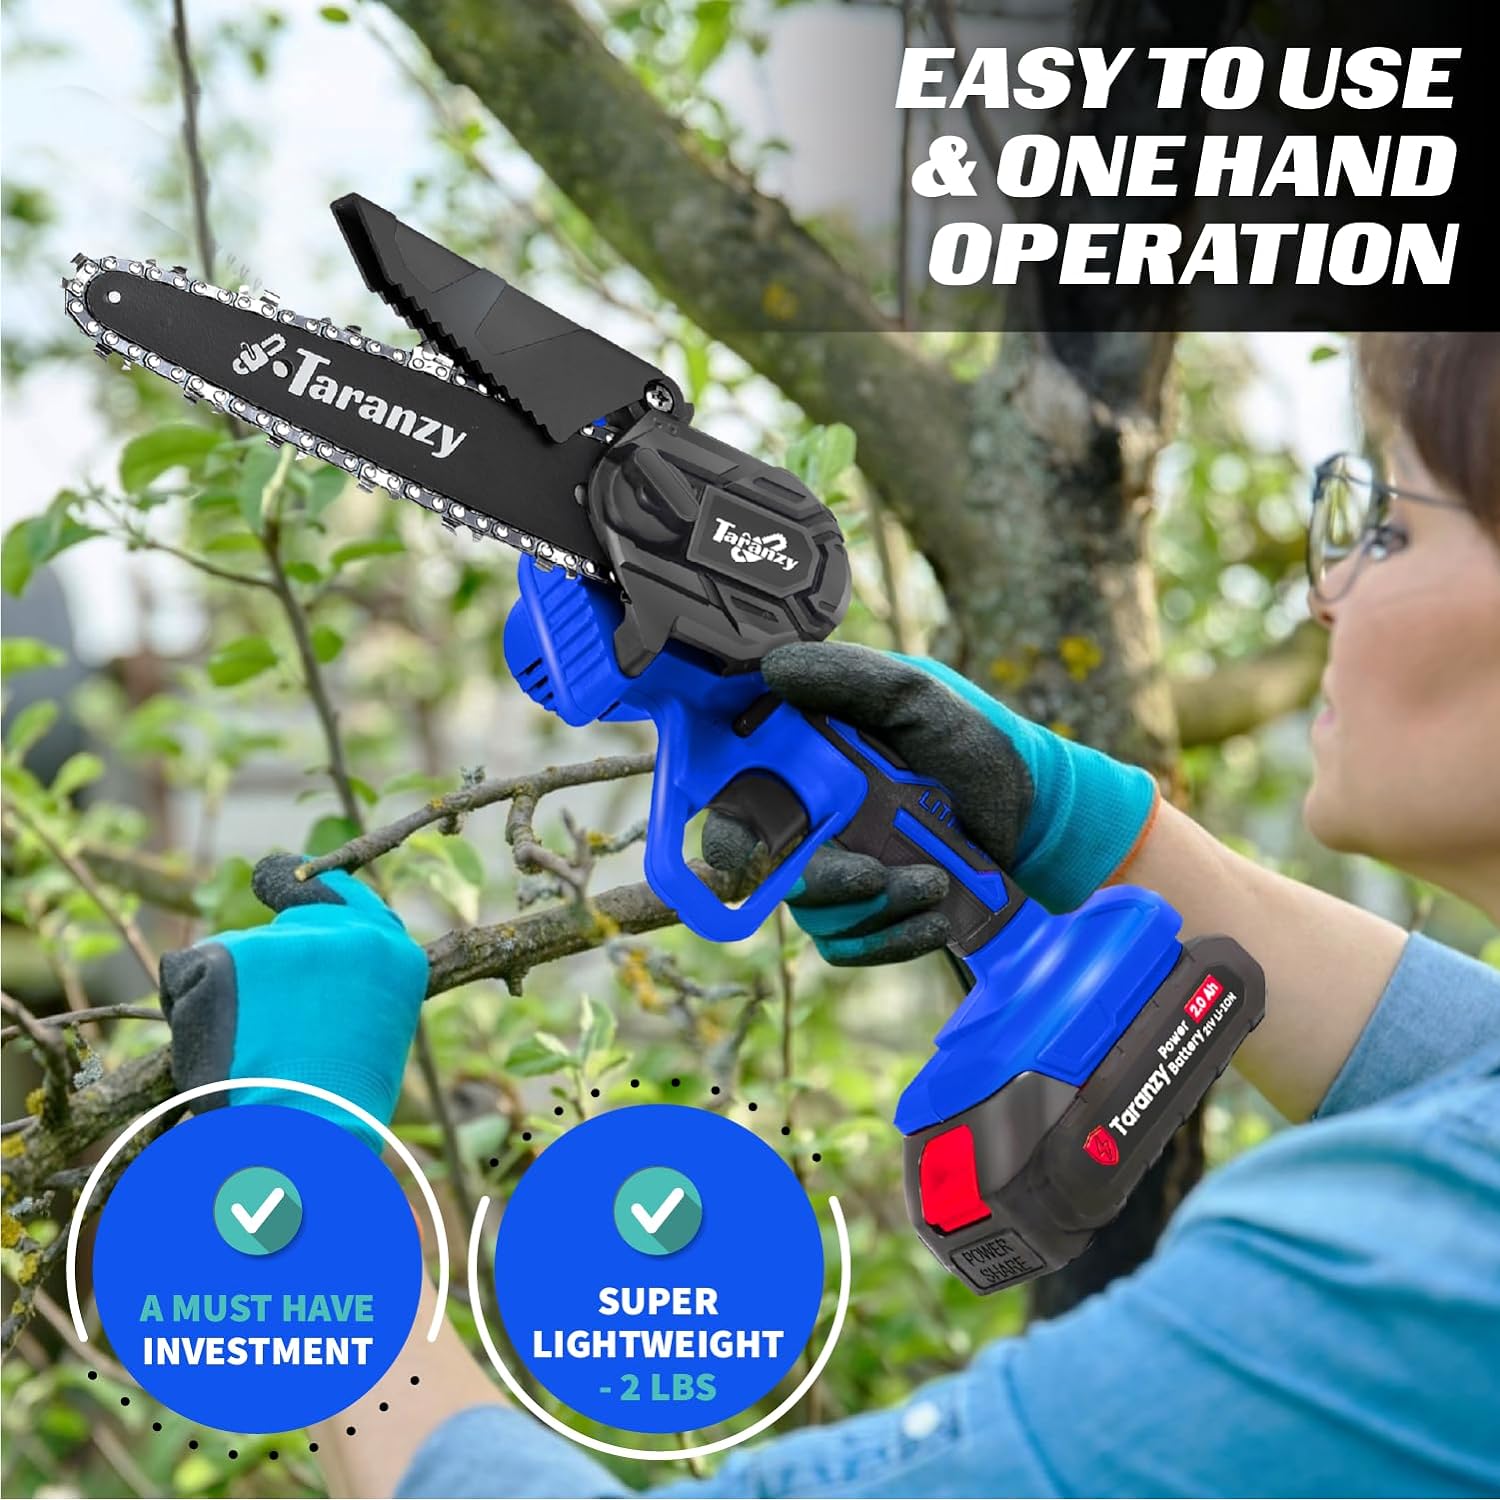 Mini Chainsaw 6-Inch Electric Cordless Chainsaw with 2 Chains, Chain Saws  Portable Handheld Chainsaw for Tree Trimming & Wood Cutting Small